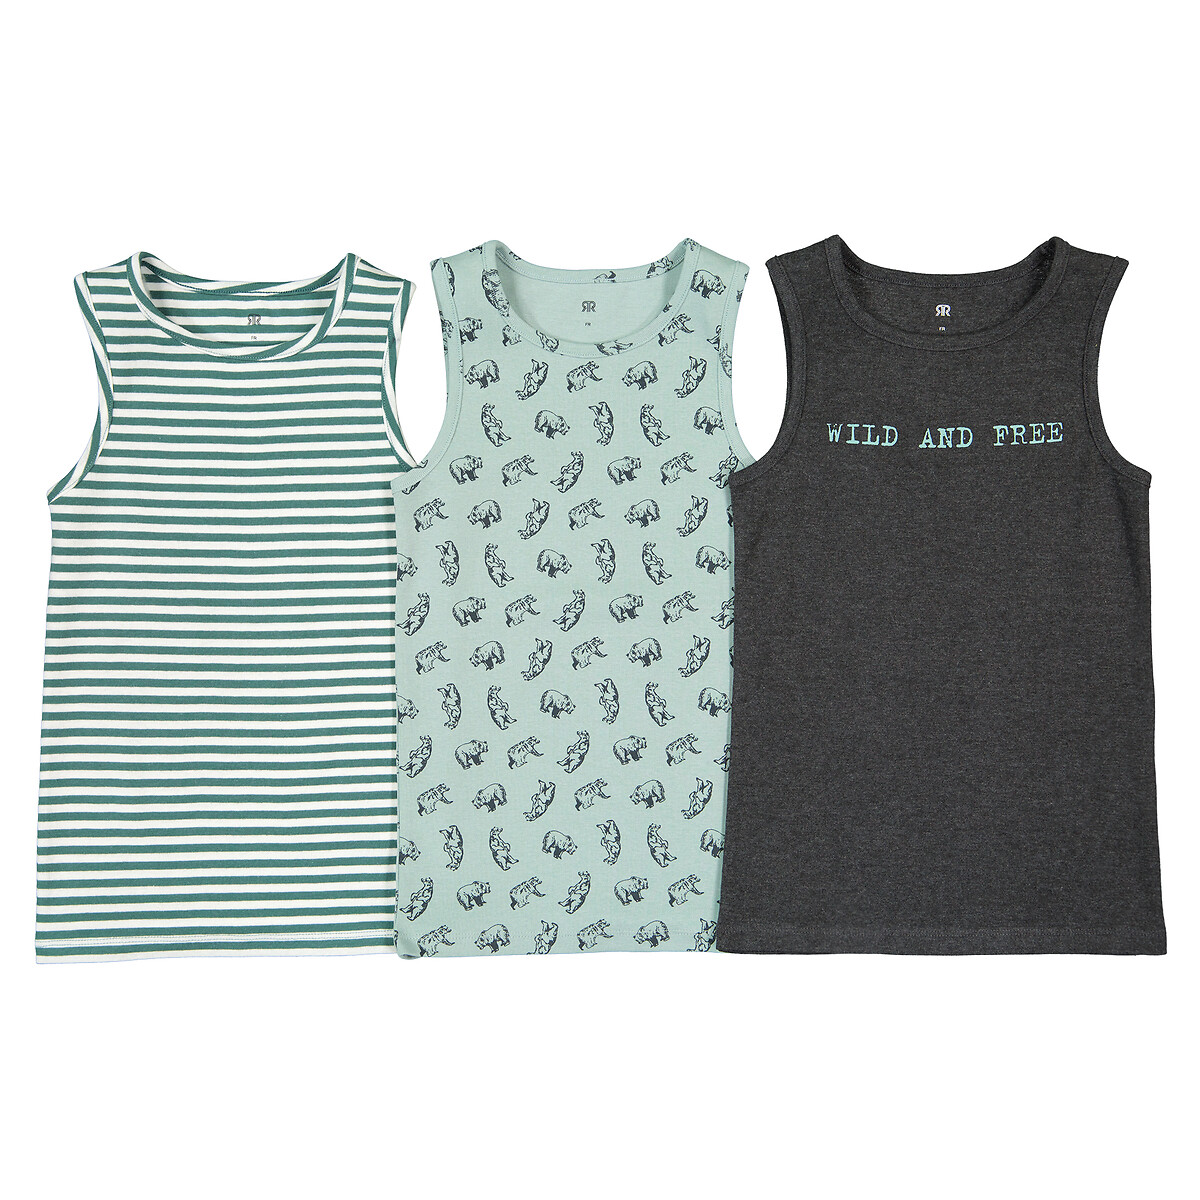 Pack of 3 Vest Tops in Cotton with Bear Print